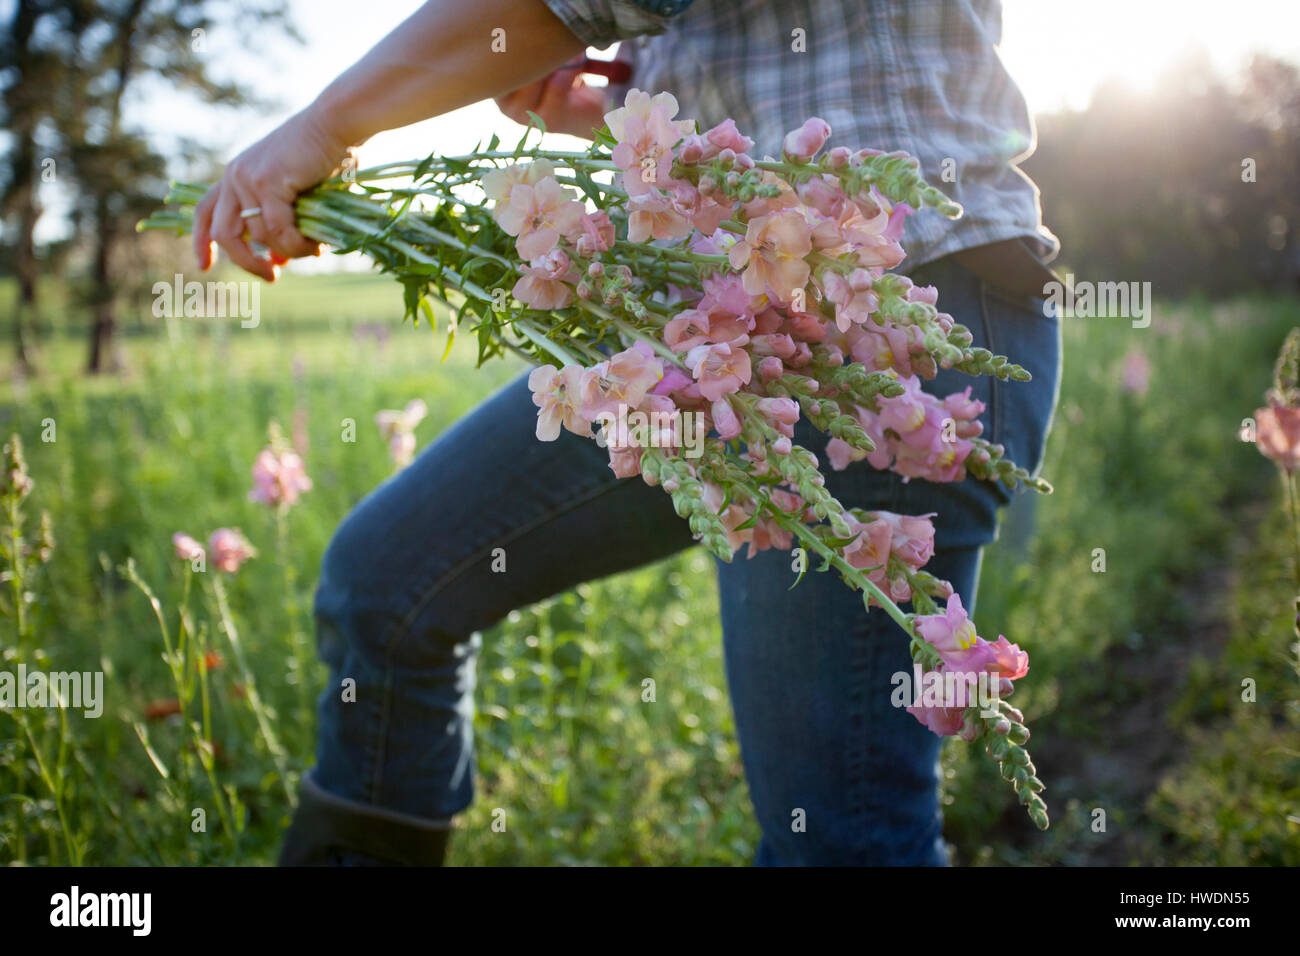 Mid section of woman selecting snapdragons (antirrhinum) from flower farm field Stock Photo